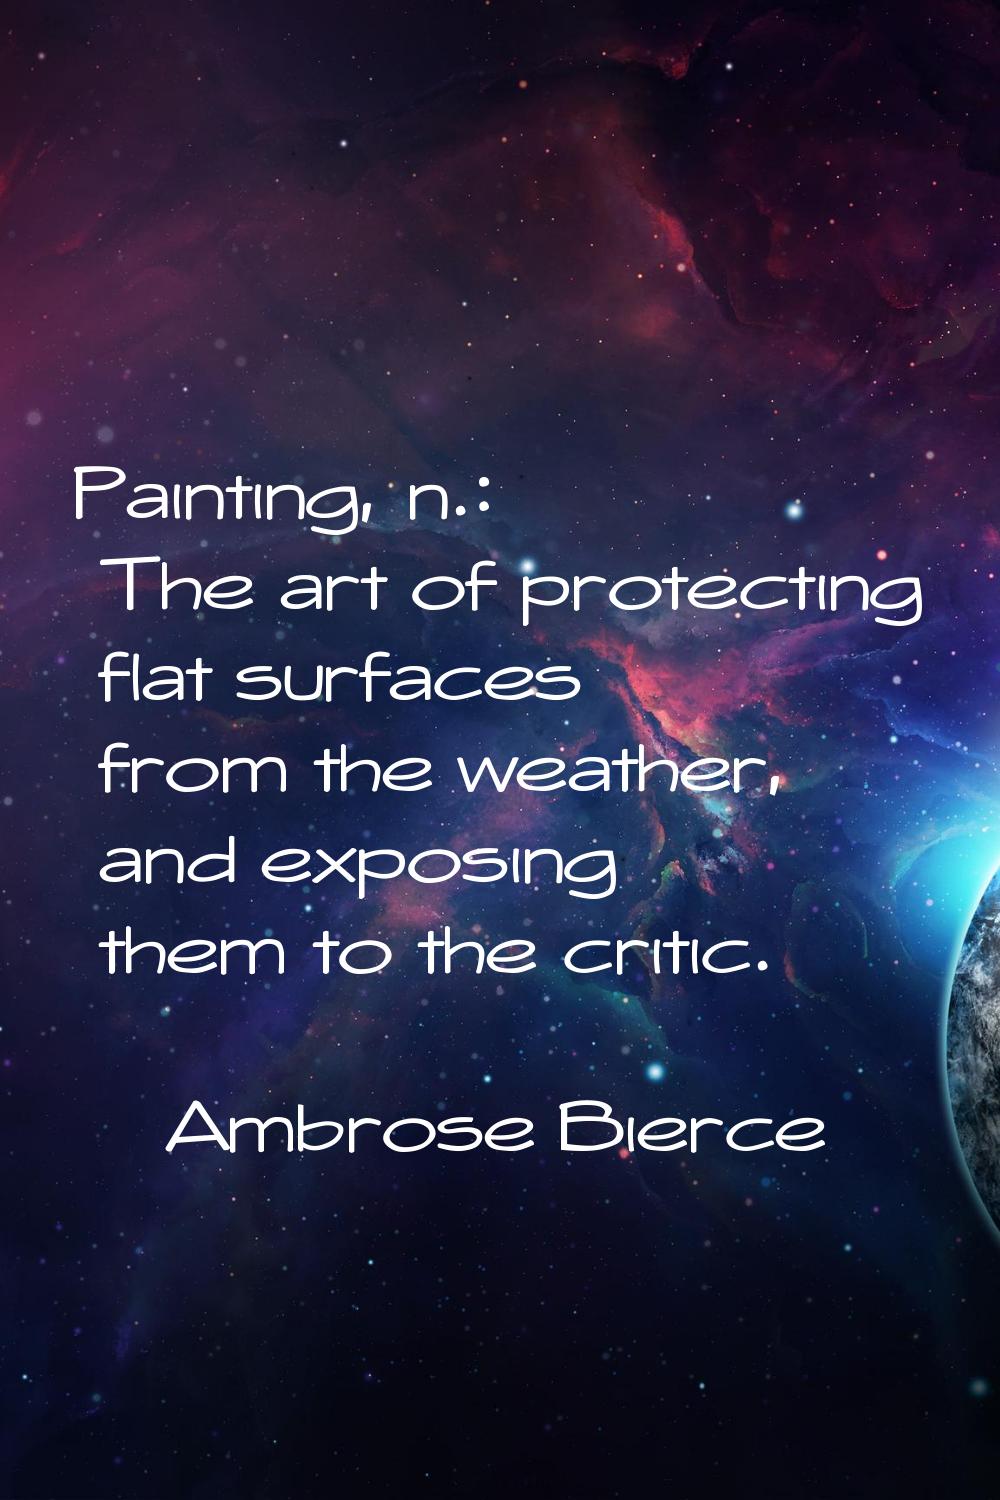 Painting, n.: The art of protecting flat surfaces from the weather, and exposing them to the critic